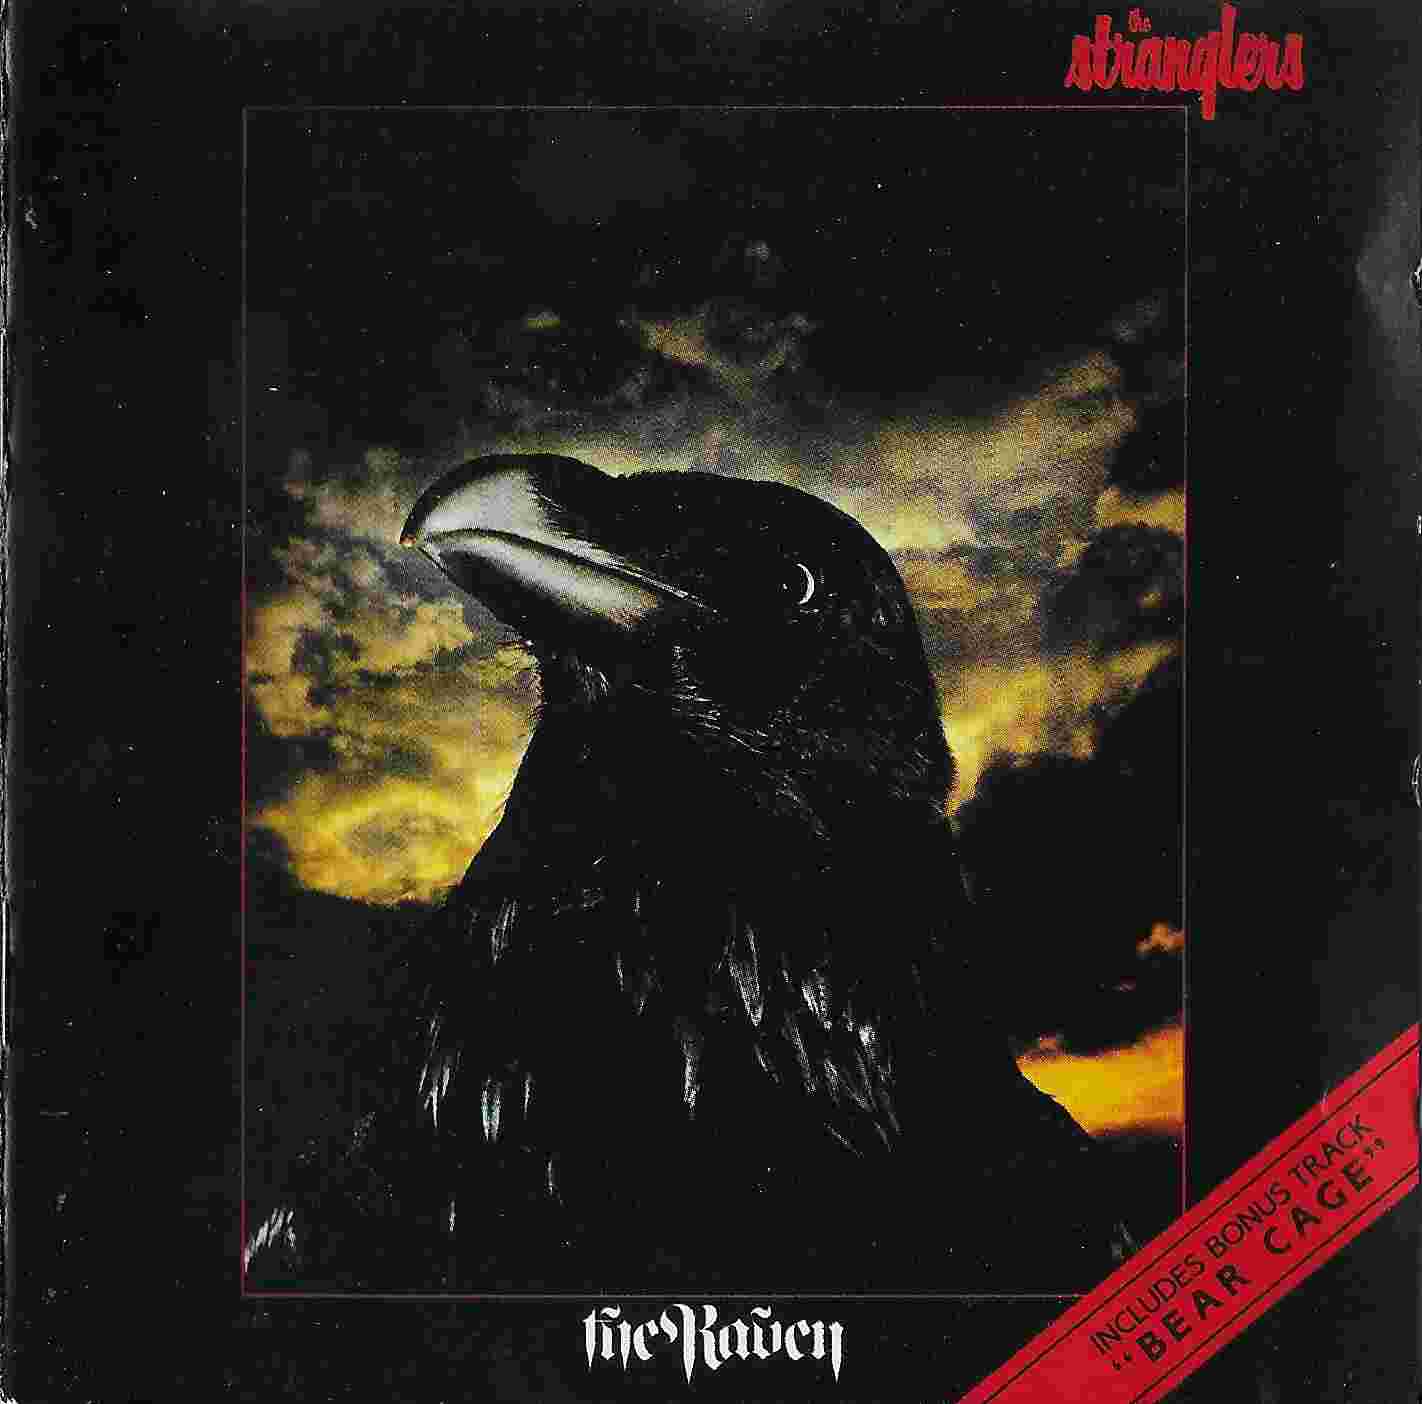 Picture of CDP 746615 2 The raven by artist The Stranglers